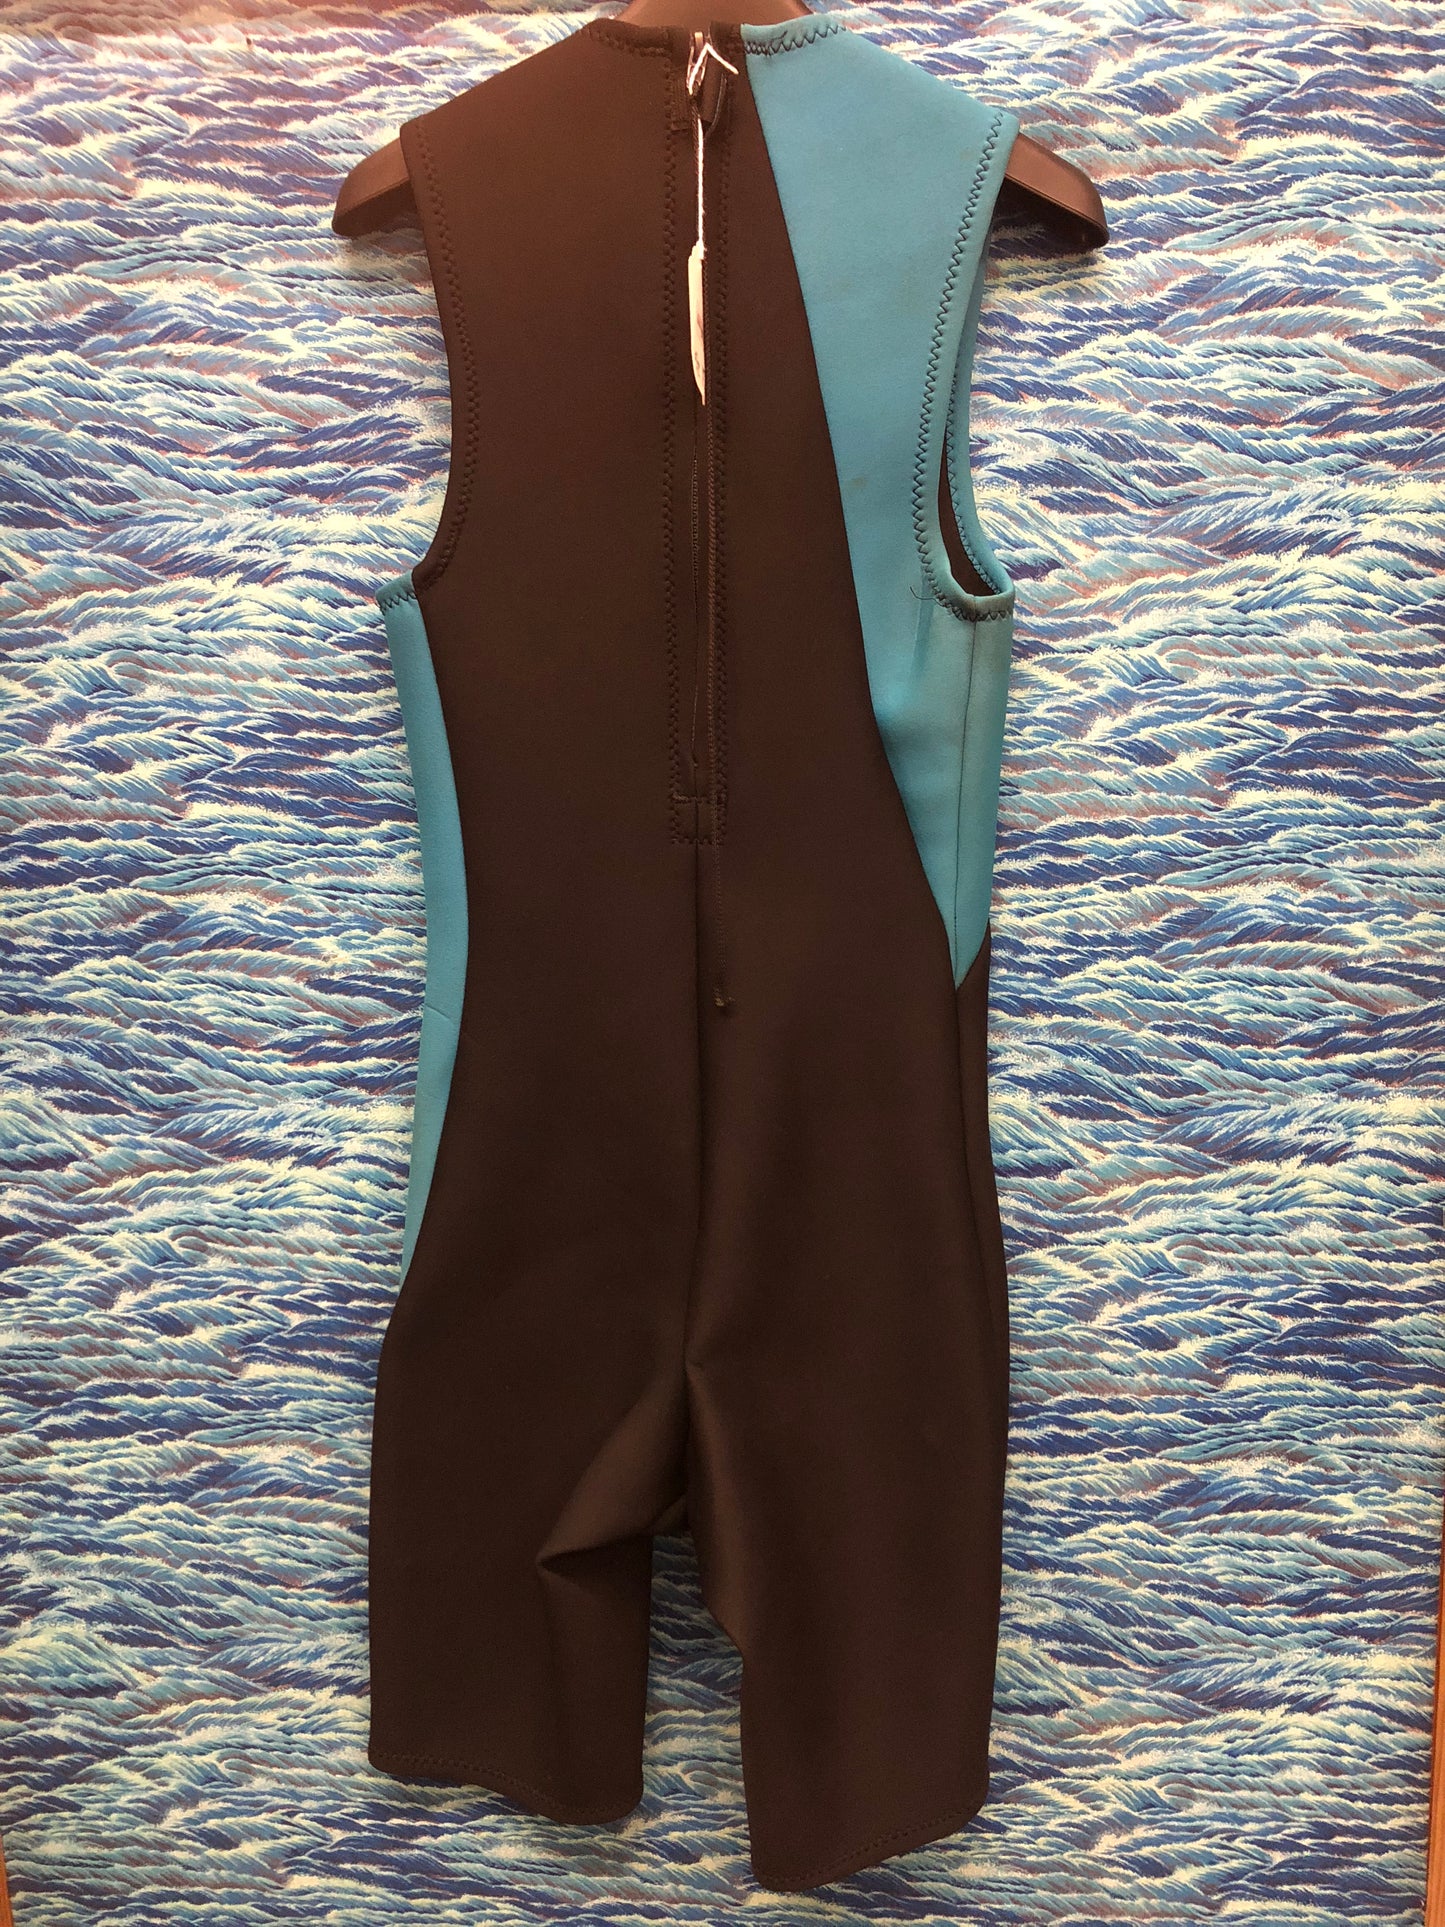 Used Wetsuit Oneill Shorty 2MM W XS